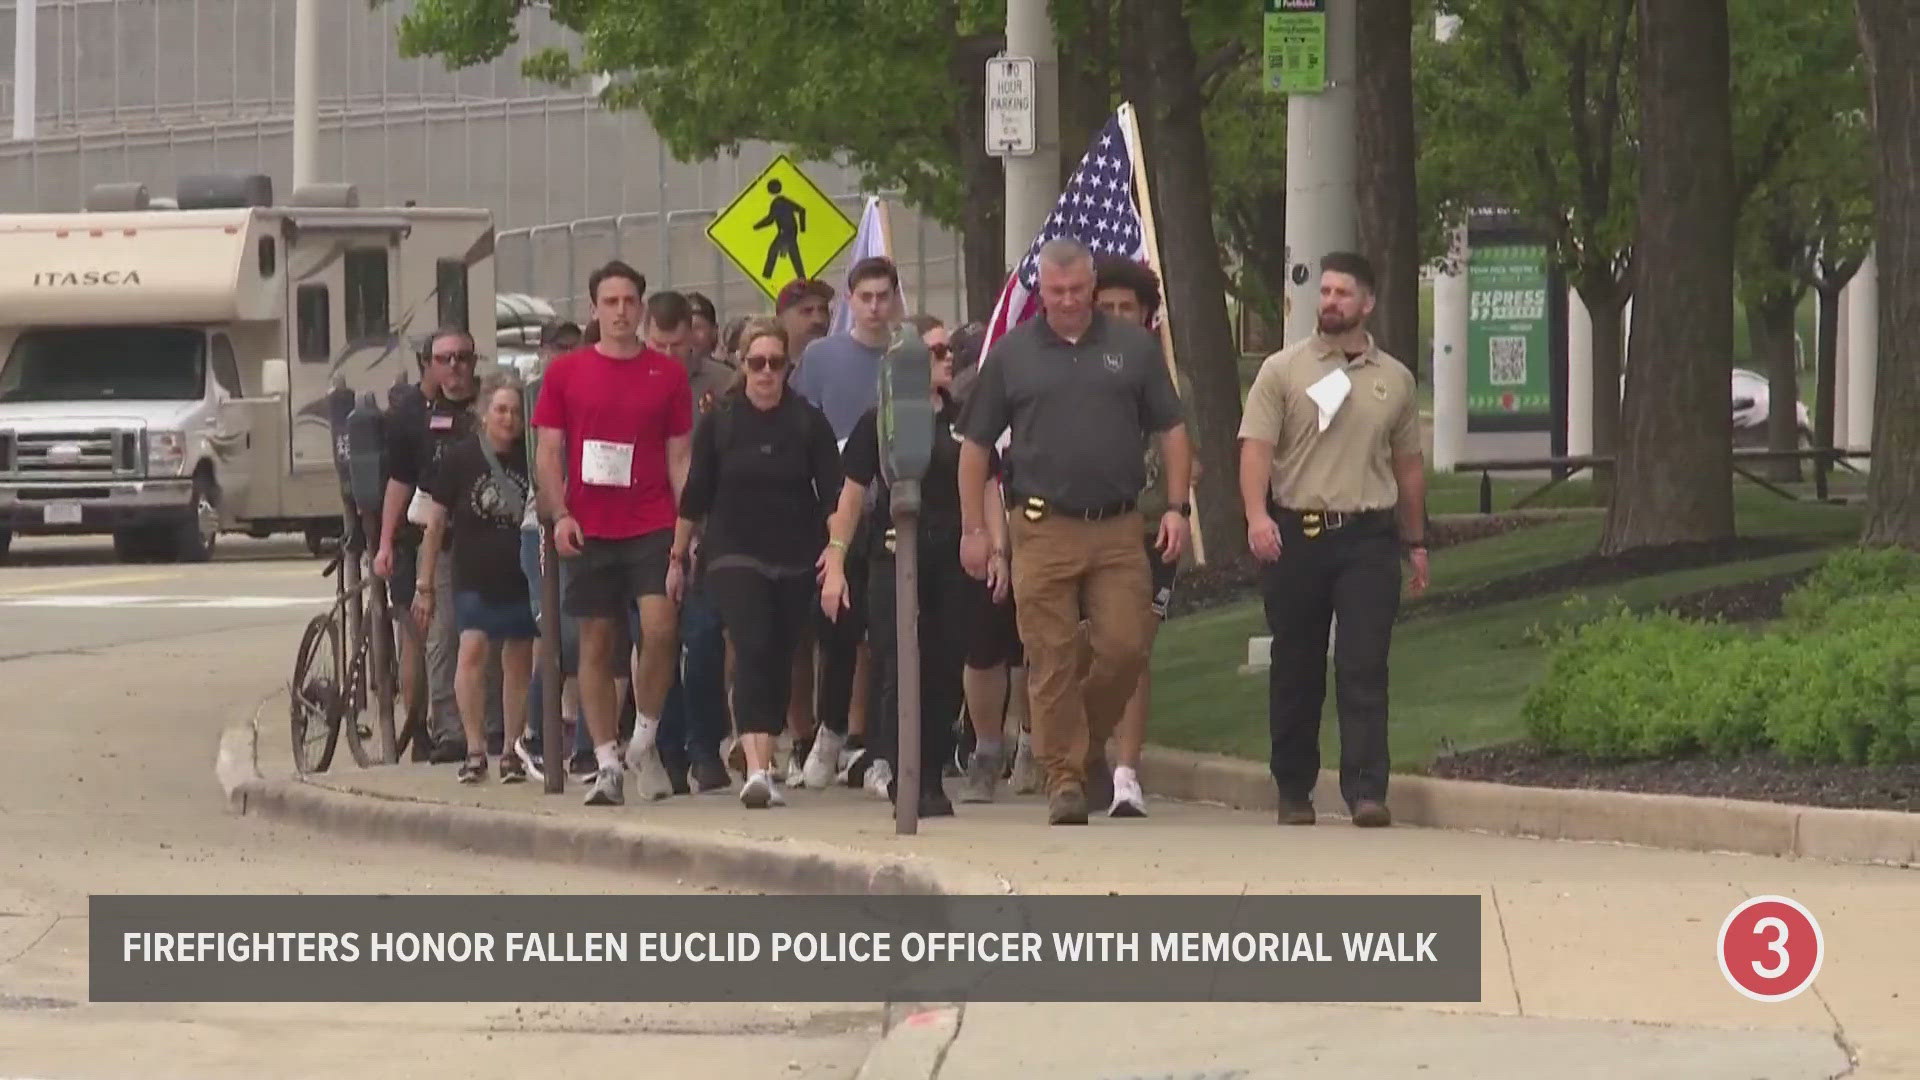 The memorial walk in honor of Jacob Derbin wrapped up at the Cleveland Firefighters Memorial outside of Cleveland Browns Stadium.